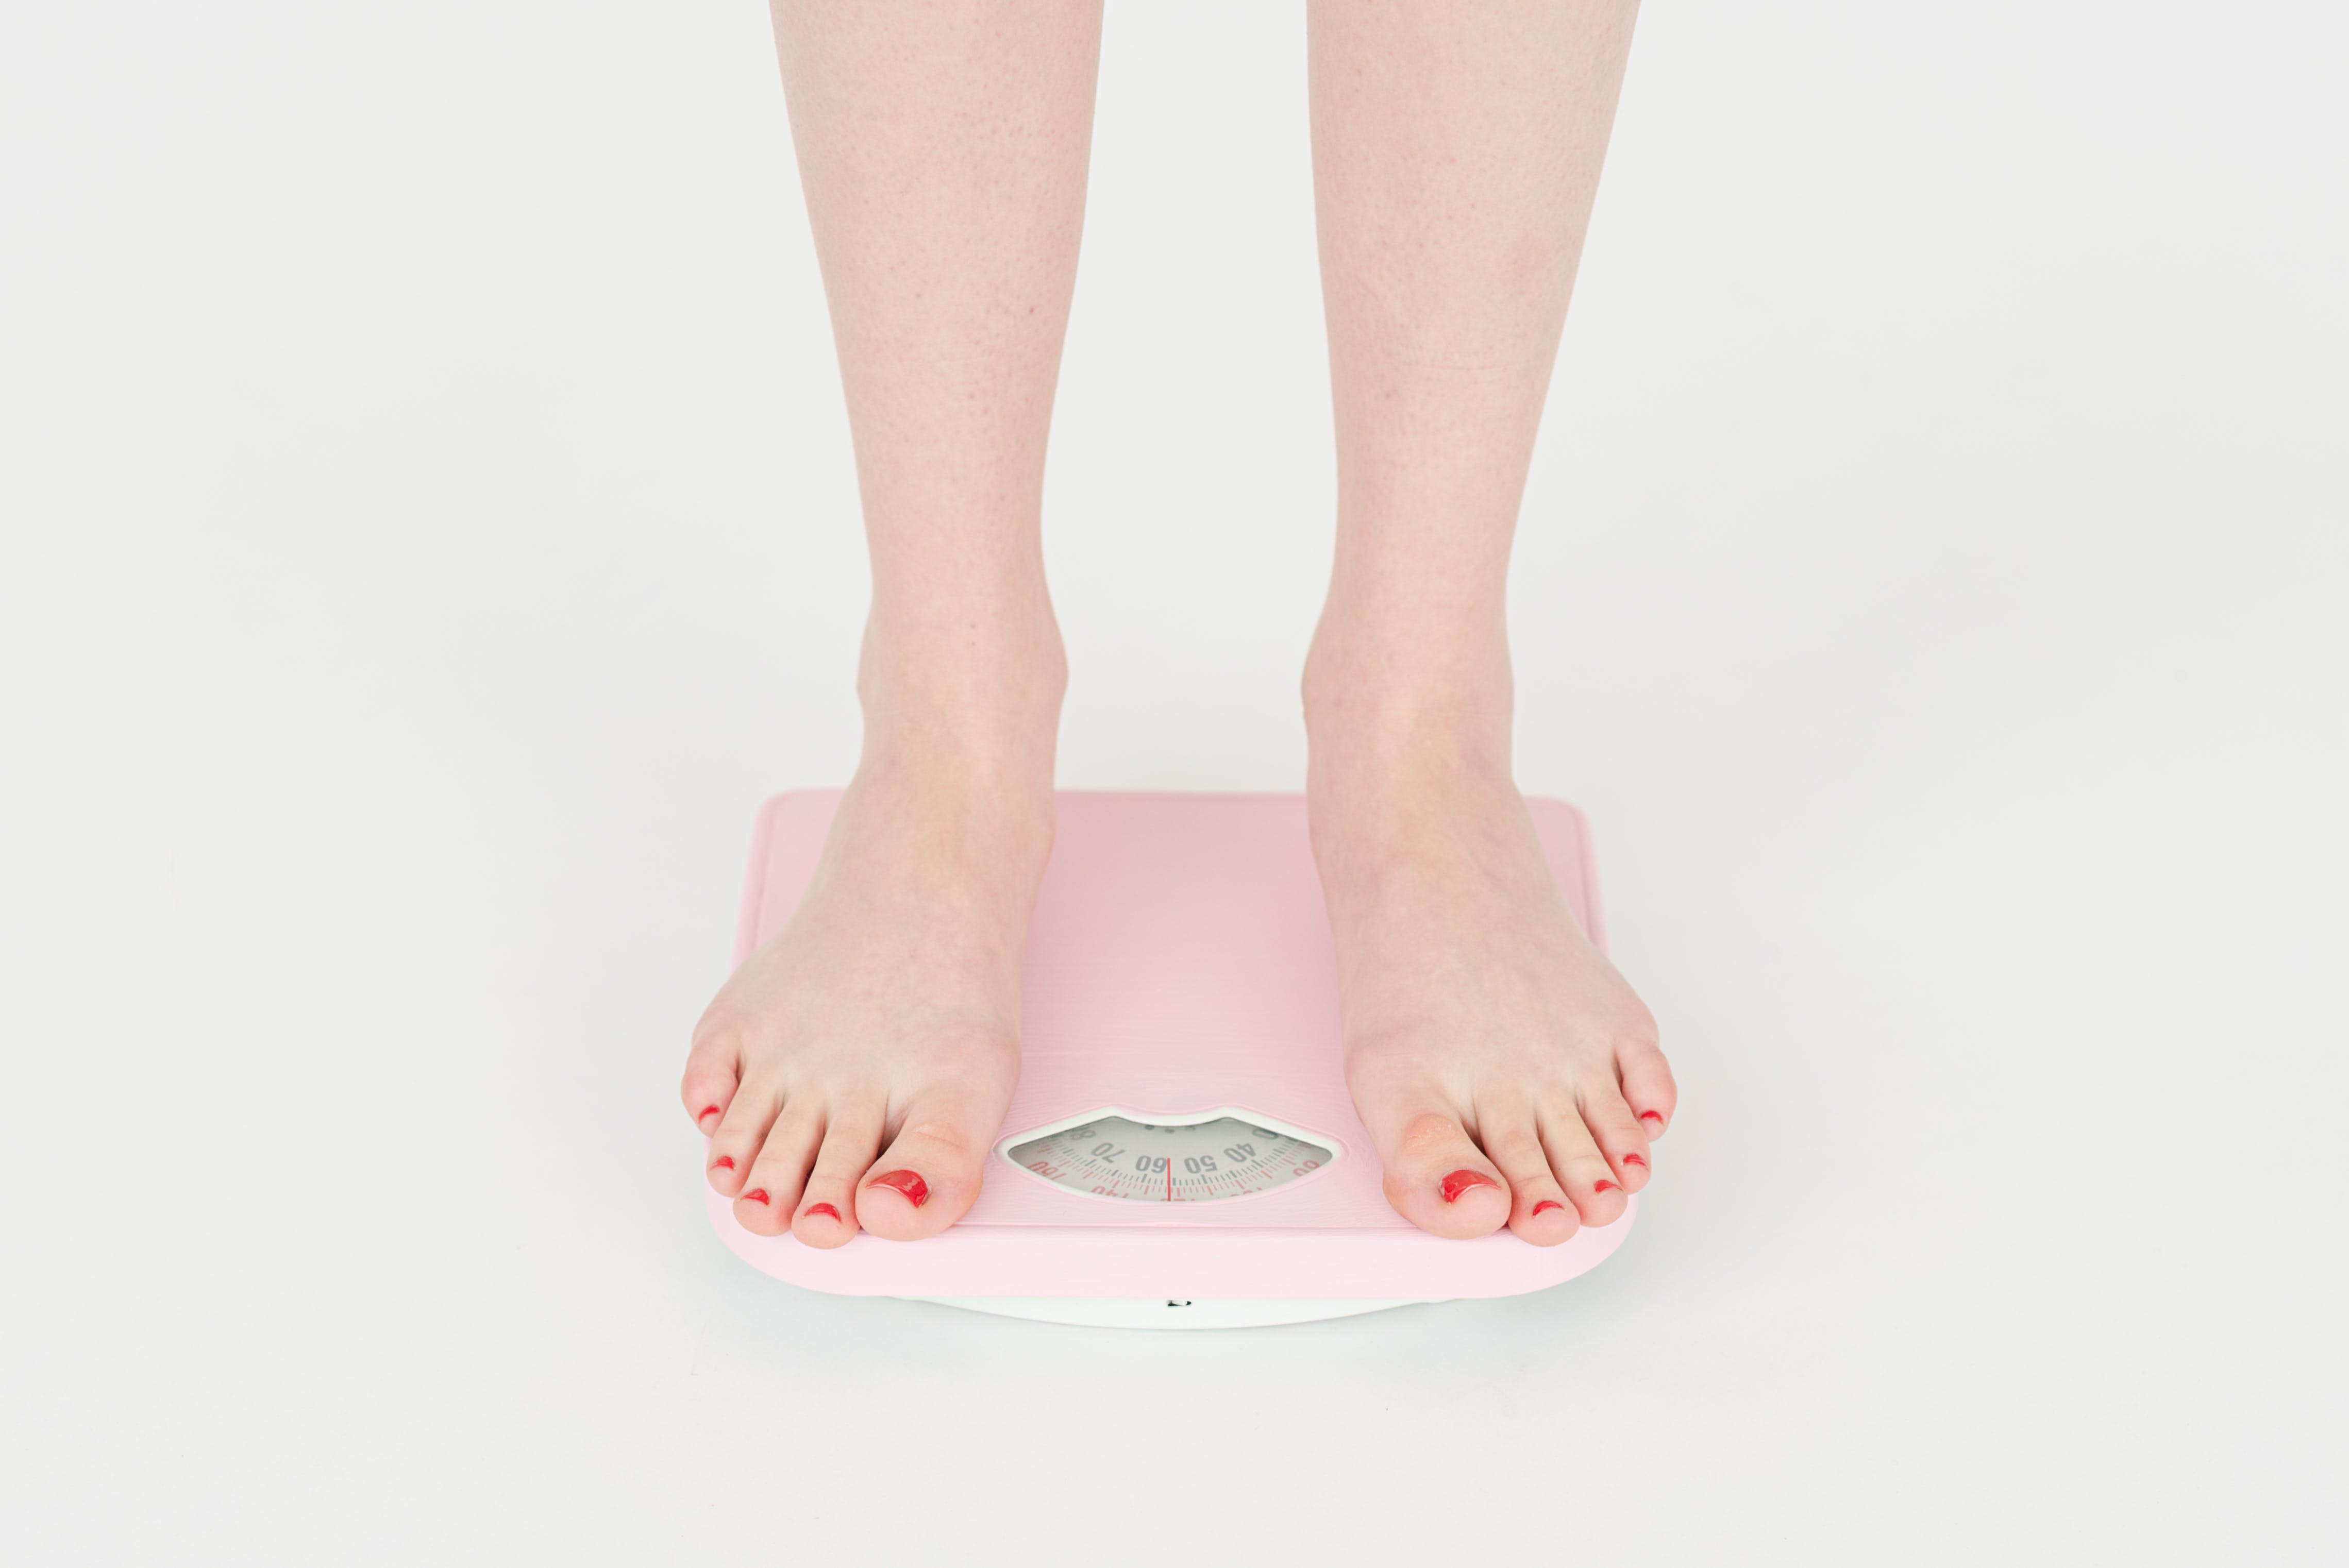 A person standing on a scale weighing themselves as different sized people will fit into different sized cadaver bag.